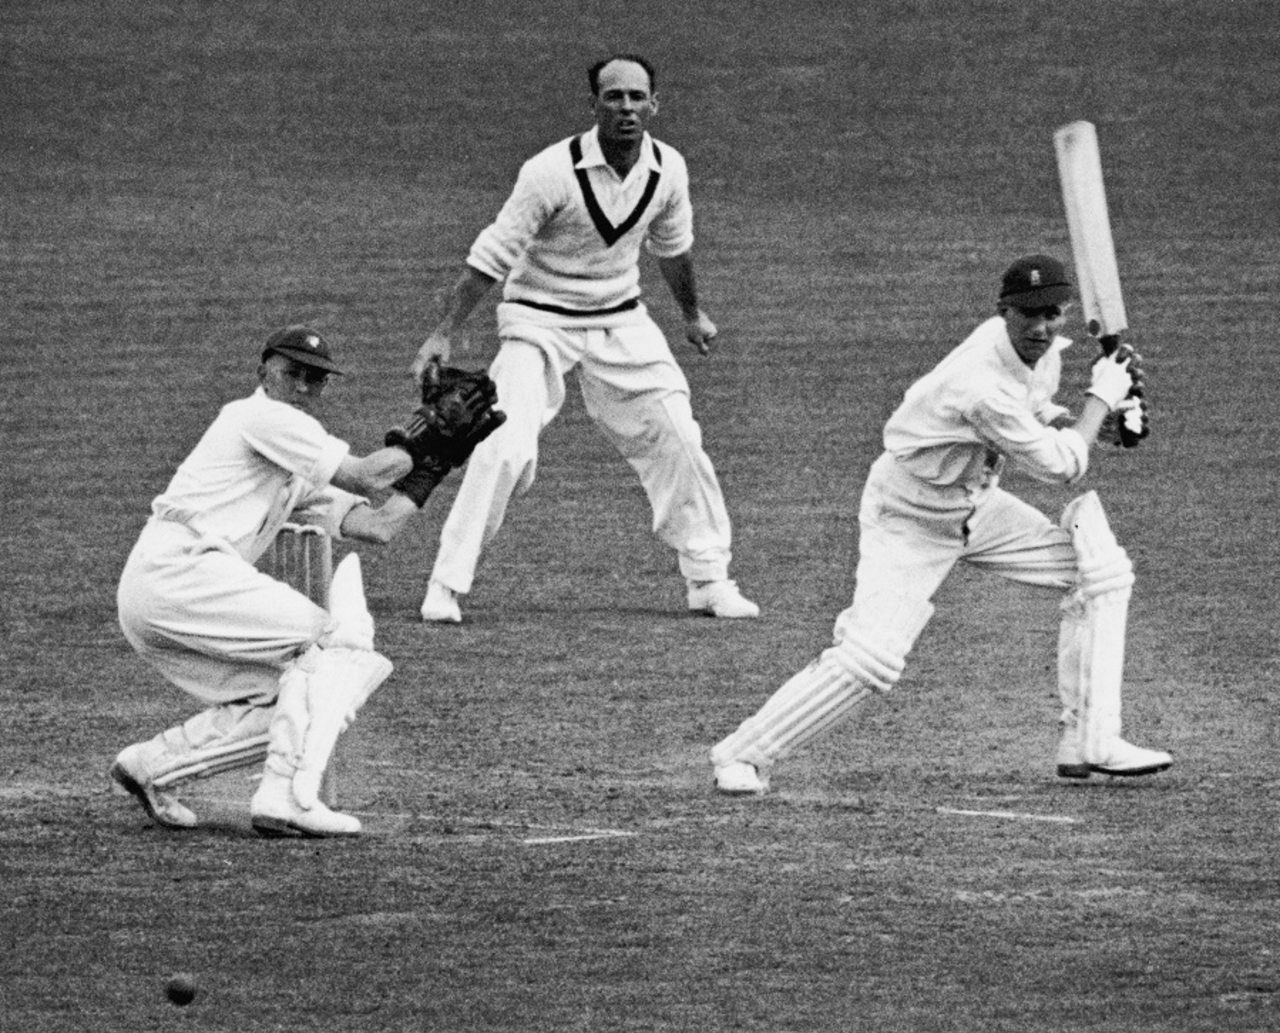 With 1521 Test runs at the venue, Len Hutton was well accustomed to lording it at The Oval